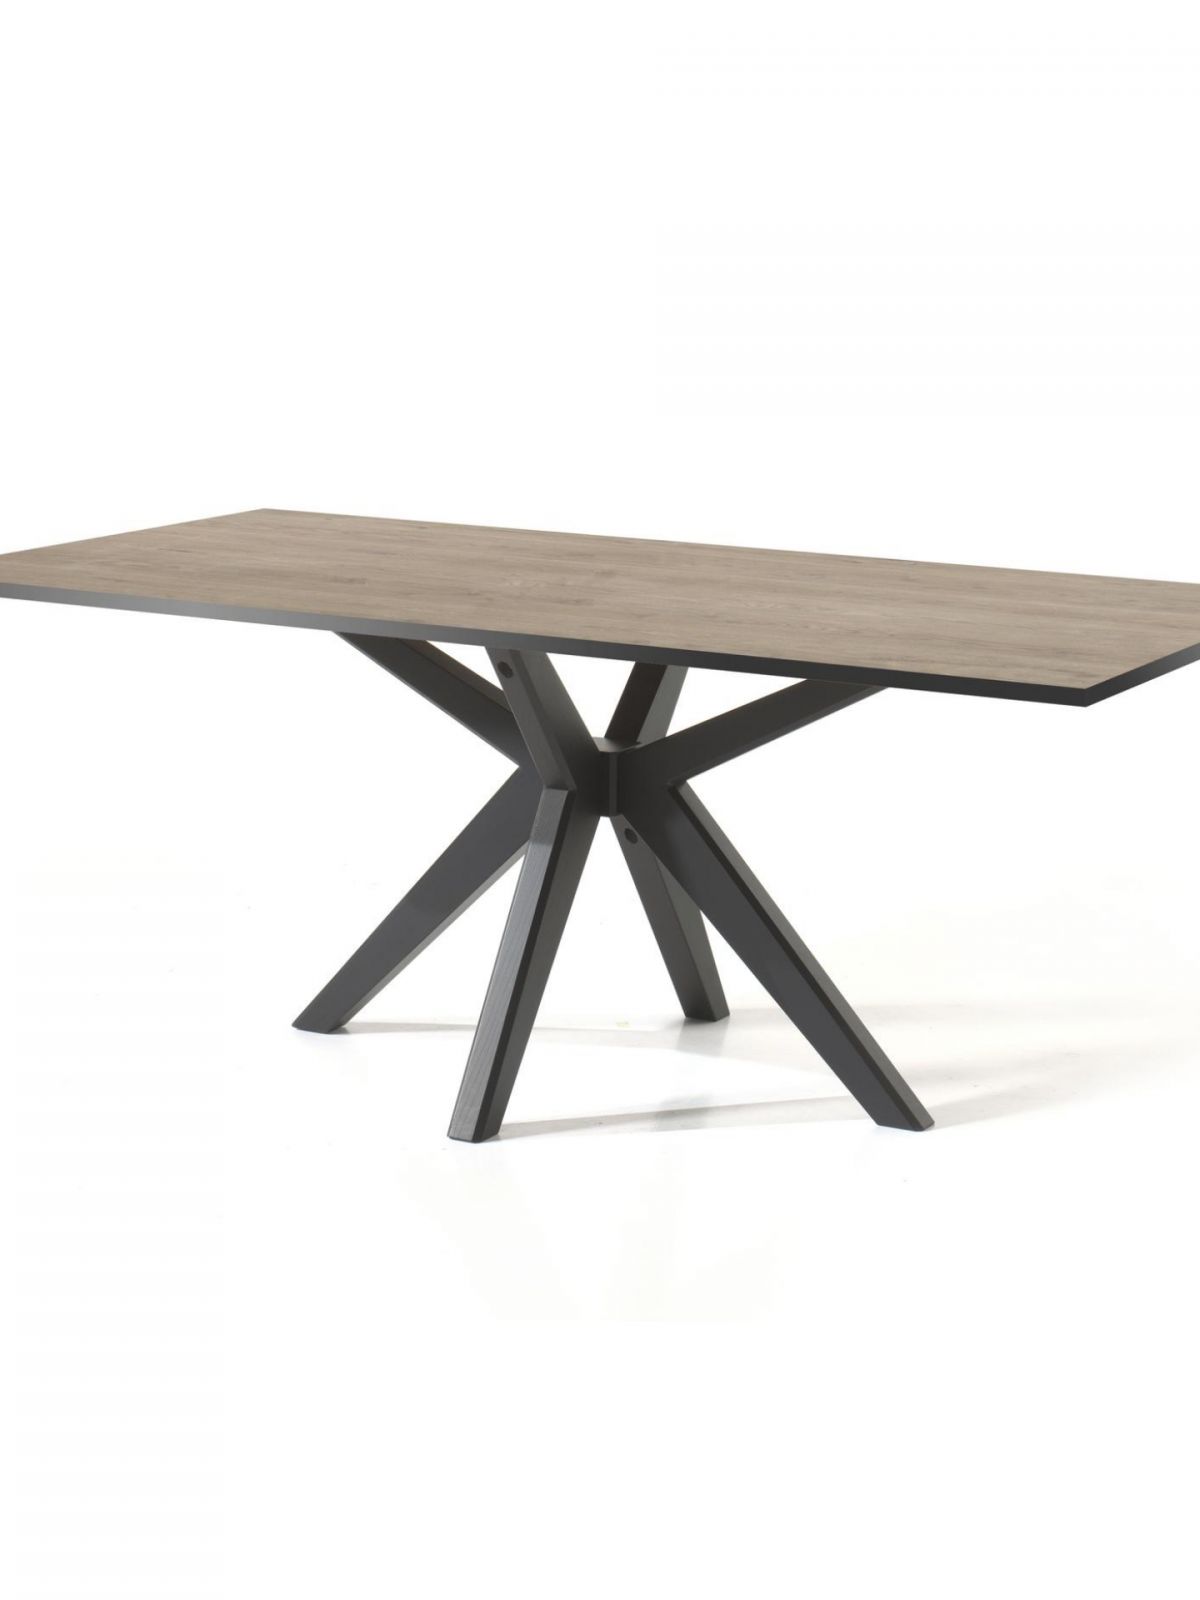 Table fixe rectangulaire 2,20m - X-pied central